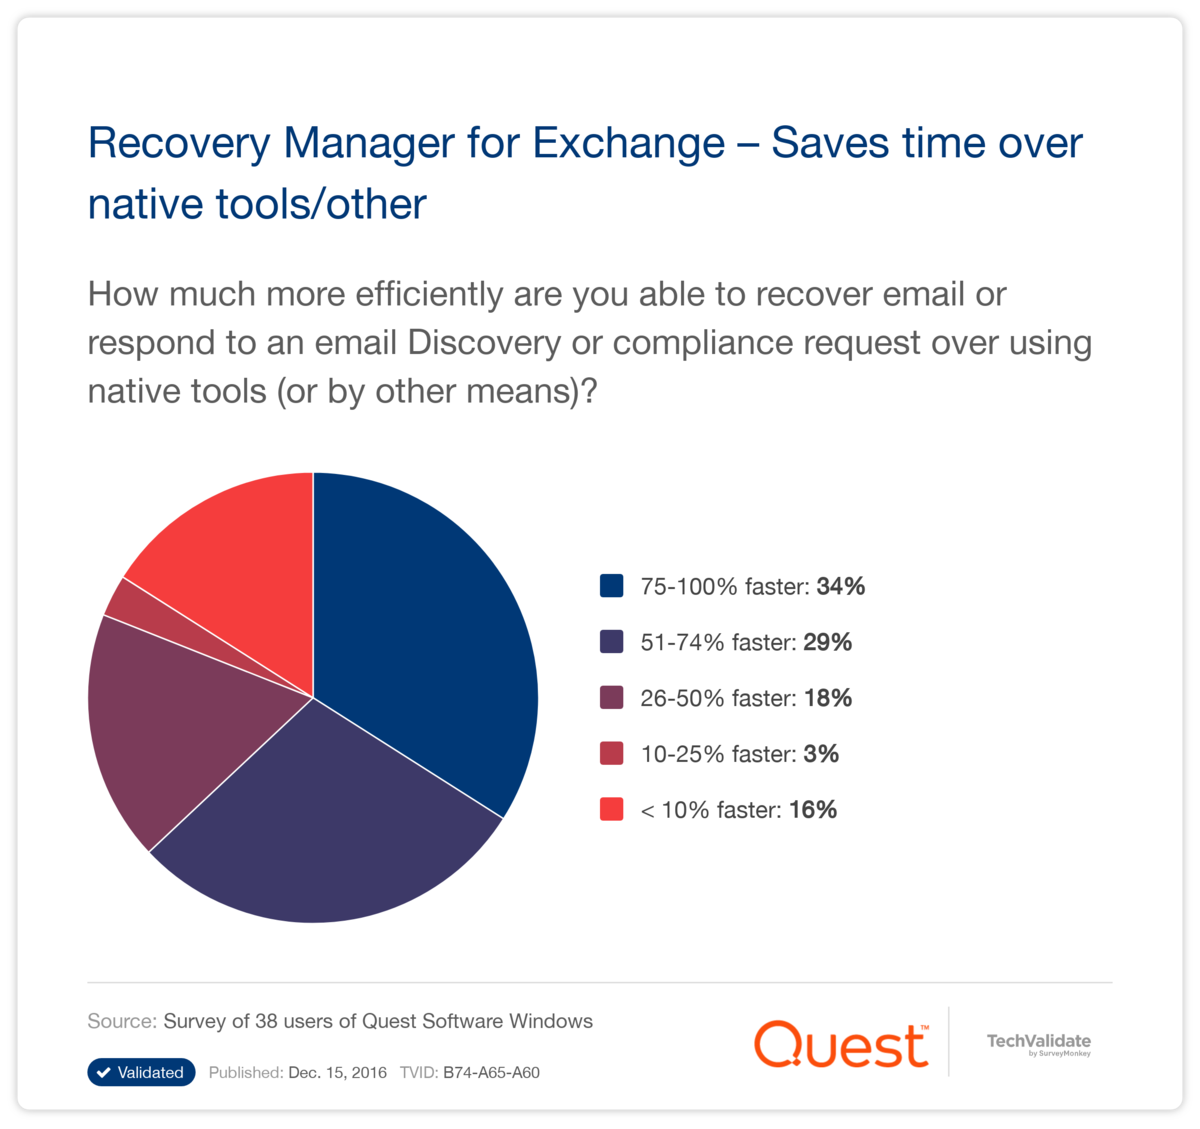 Recovery Manager for Exchange-Saves time over native tools/other